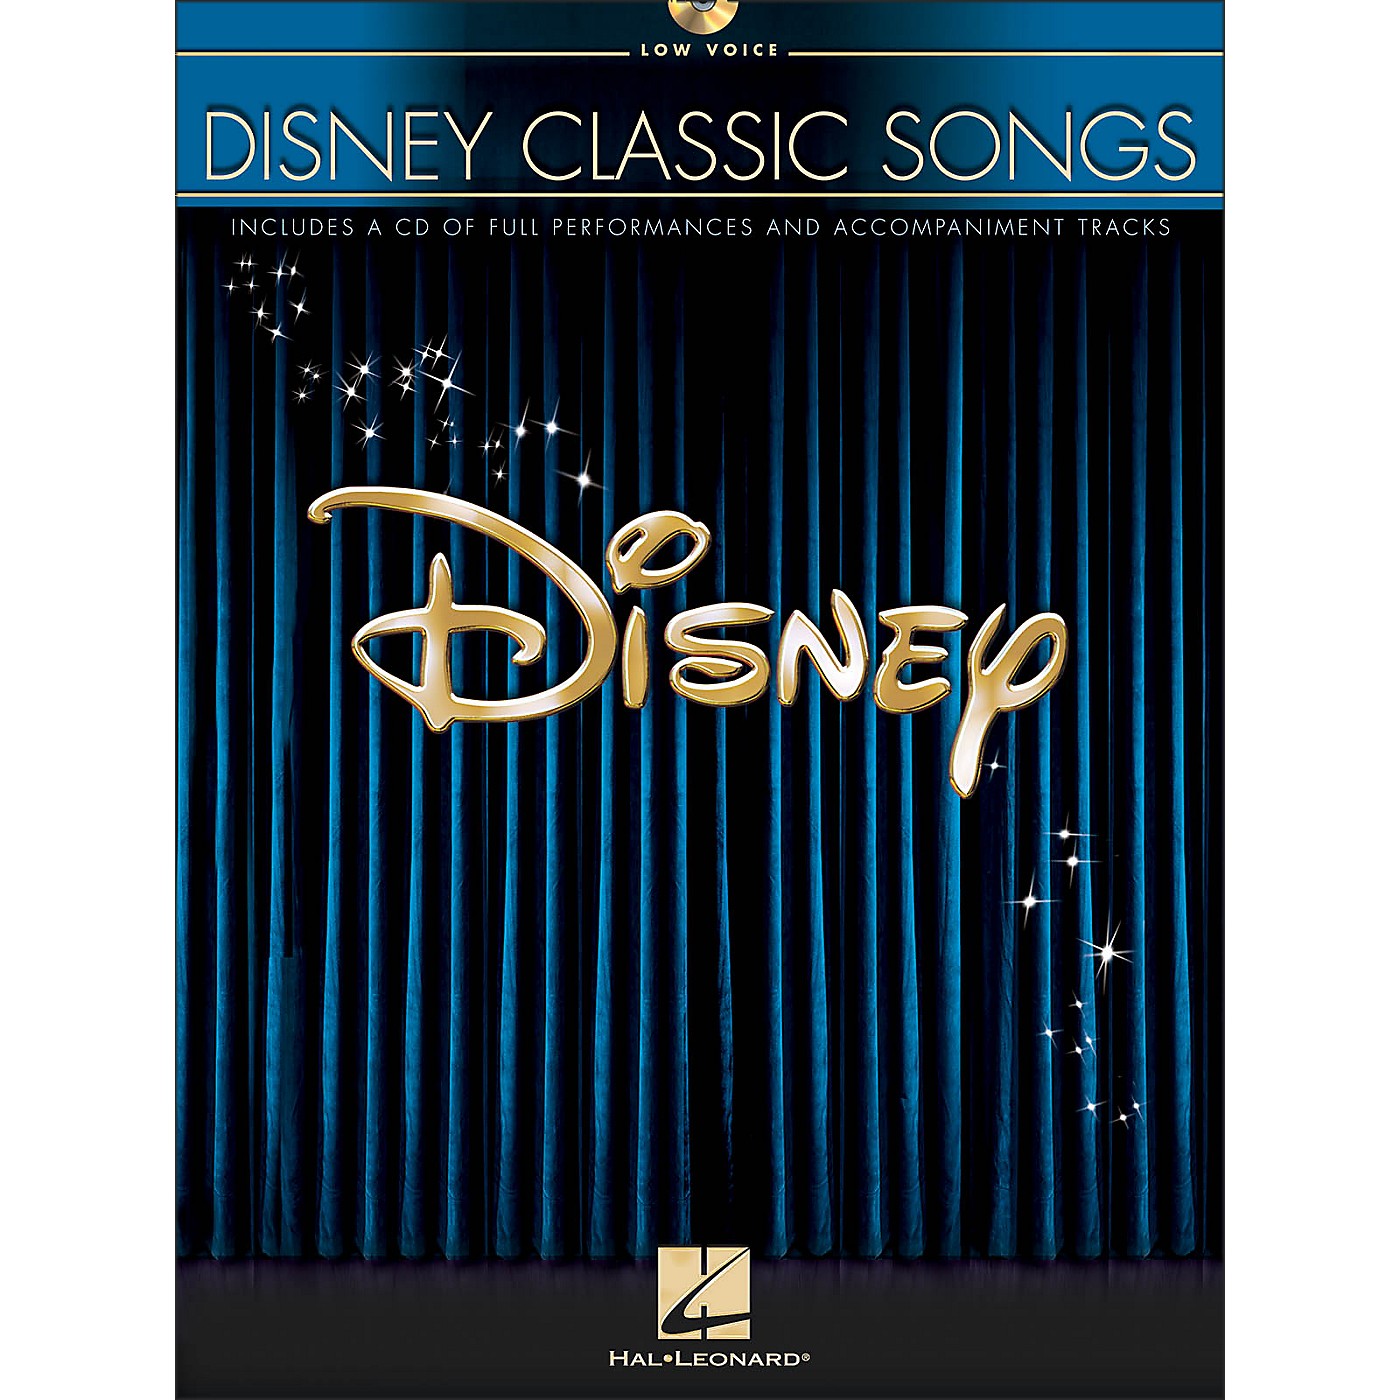 Hal Leonard Disney Classic Songs for Low Voice Book/CD thumbnail